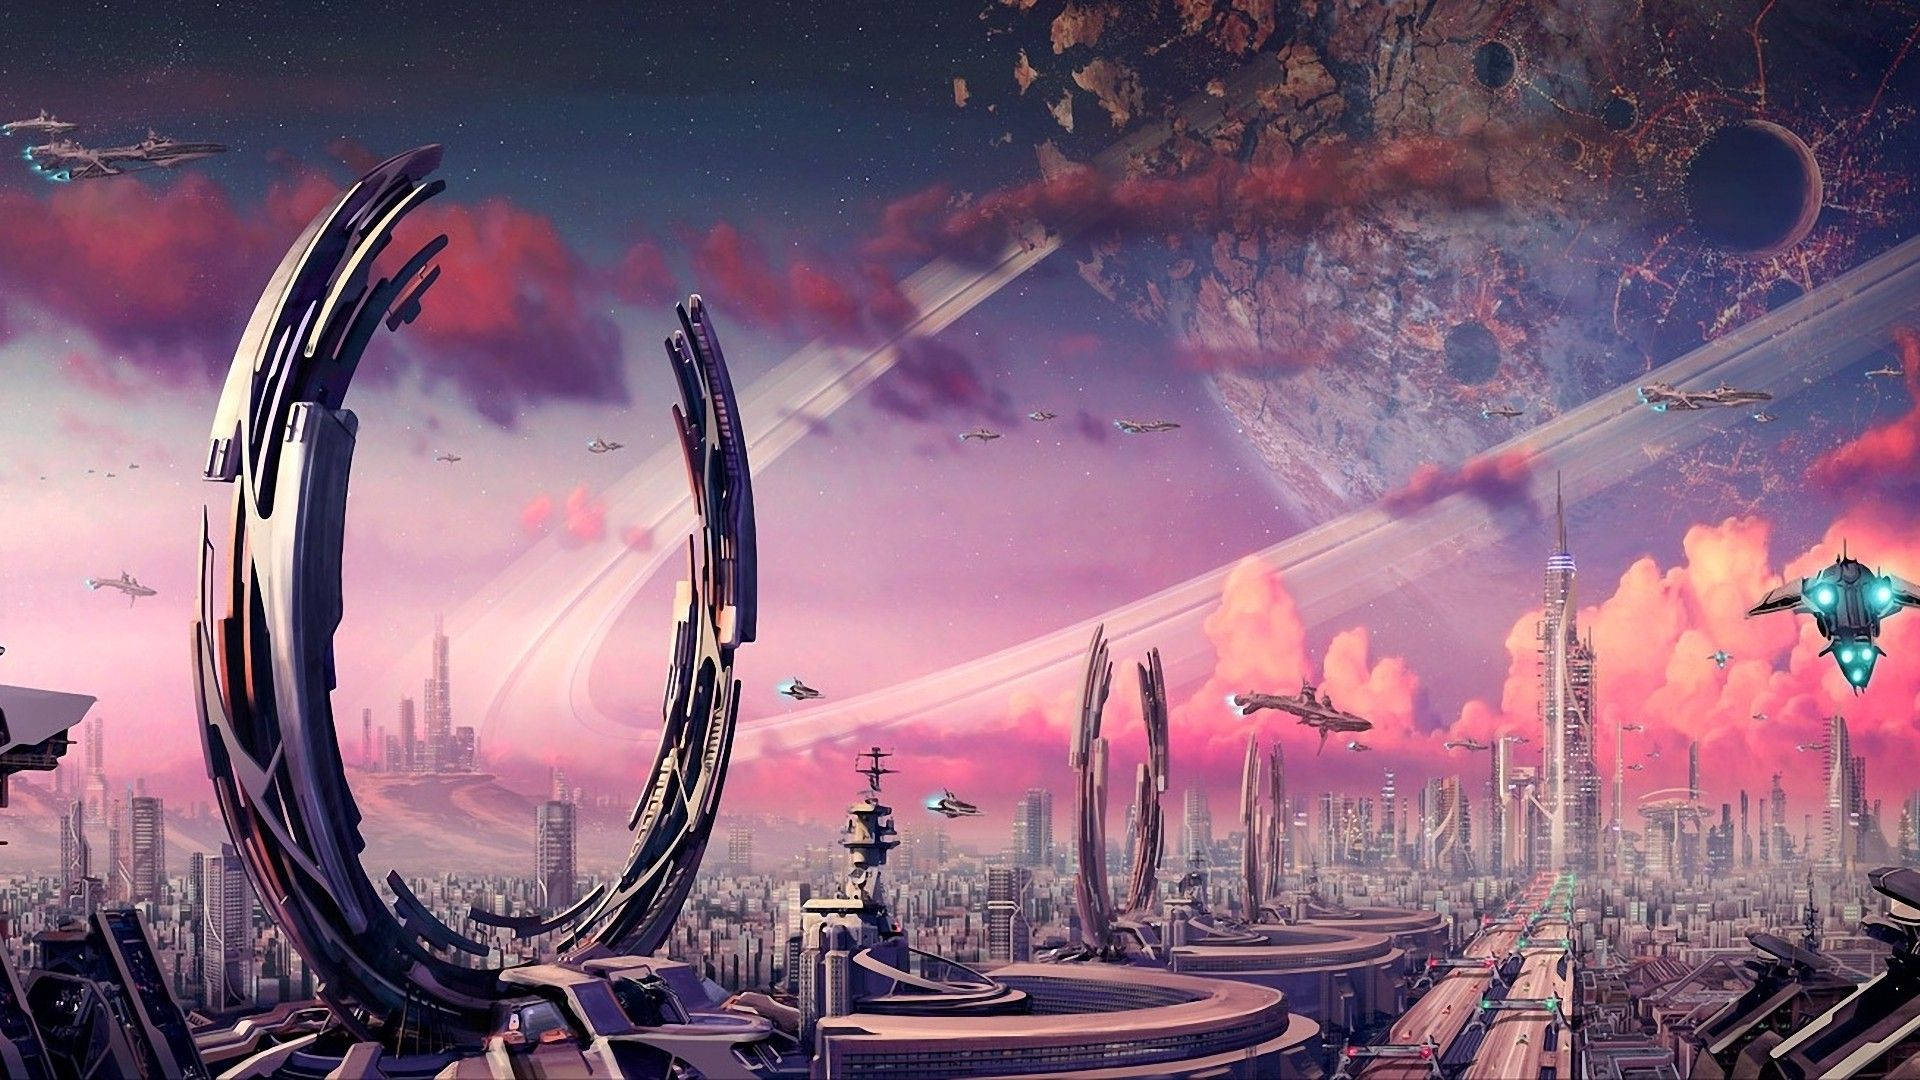 Futuristic City On Another Planet Wallpaper